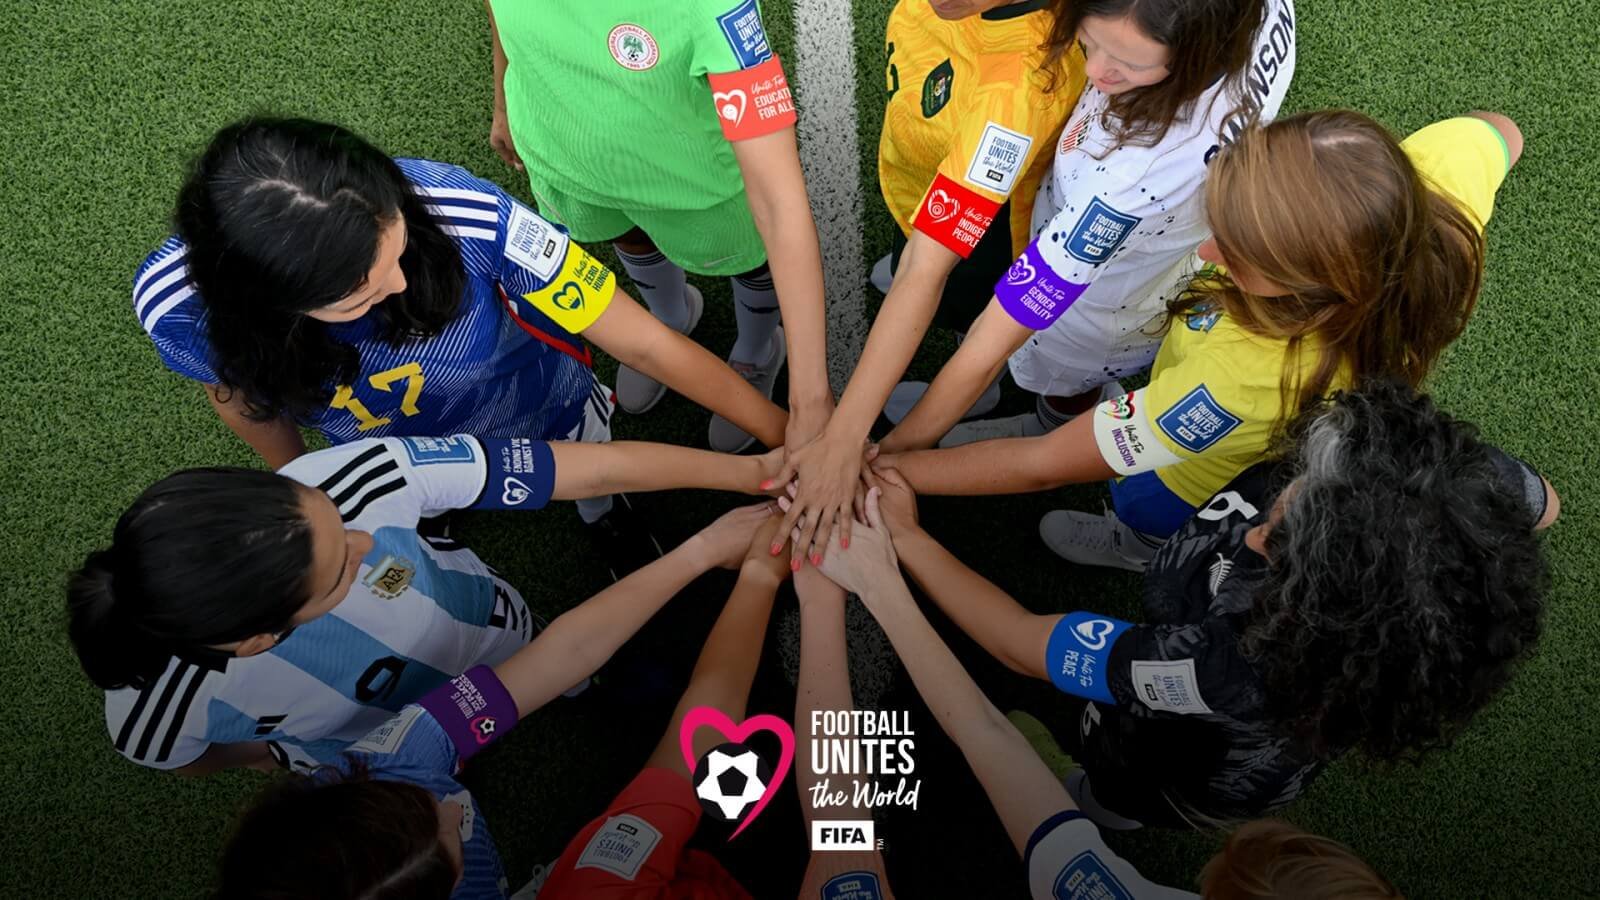 Football unites the world - girls with armbands